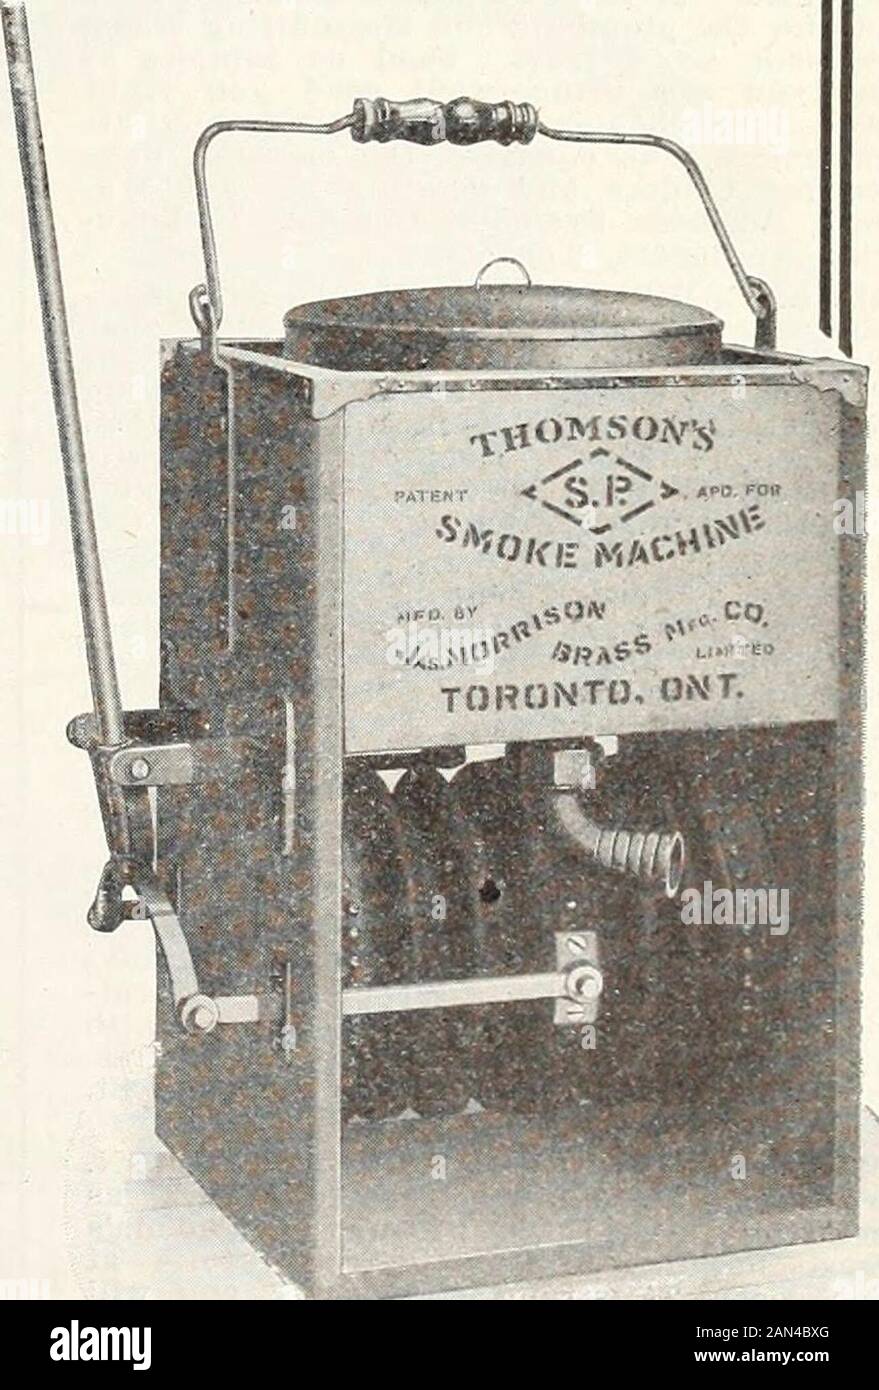 Mechanical Contracting & Plumbing January-December 1912 . The Plumbers Busy Season will soon begin and you will have to make a great number of tests.By using the Thomson SMOKEMACHINE all leaks can be quickly detectedand rectified. This testing machine is themost practical and scientificdevice of its kind. Very stronglybuilt, yet light and portable, thatcan be readily carried from placeto place. It will pay you to get our circulars and prices at once. The James Morrison Brass Mfg. Co., Ltd. 93-97 Adelaide Street West, TORONTO. 19 PLUMBER AND STEAMFITTER Condensed or Want Ads. FOR SALE FOR SALE— Stock Photo